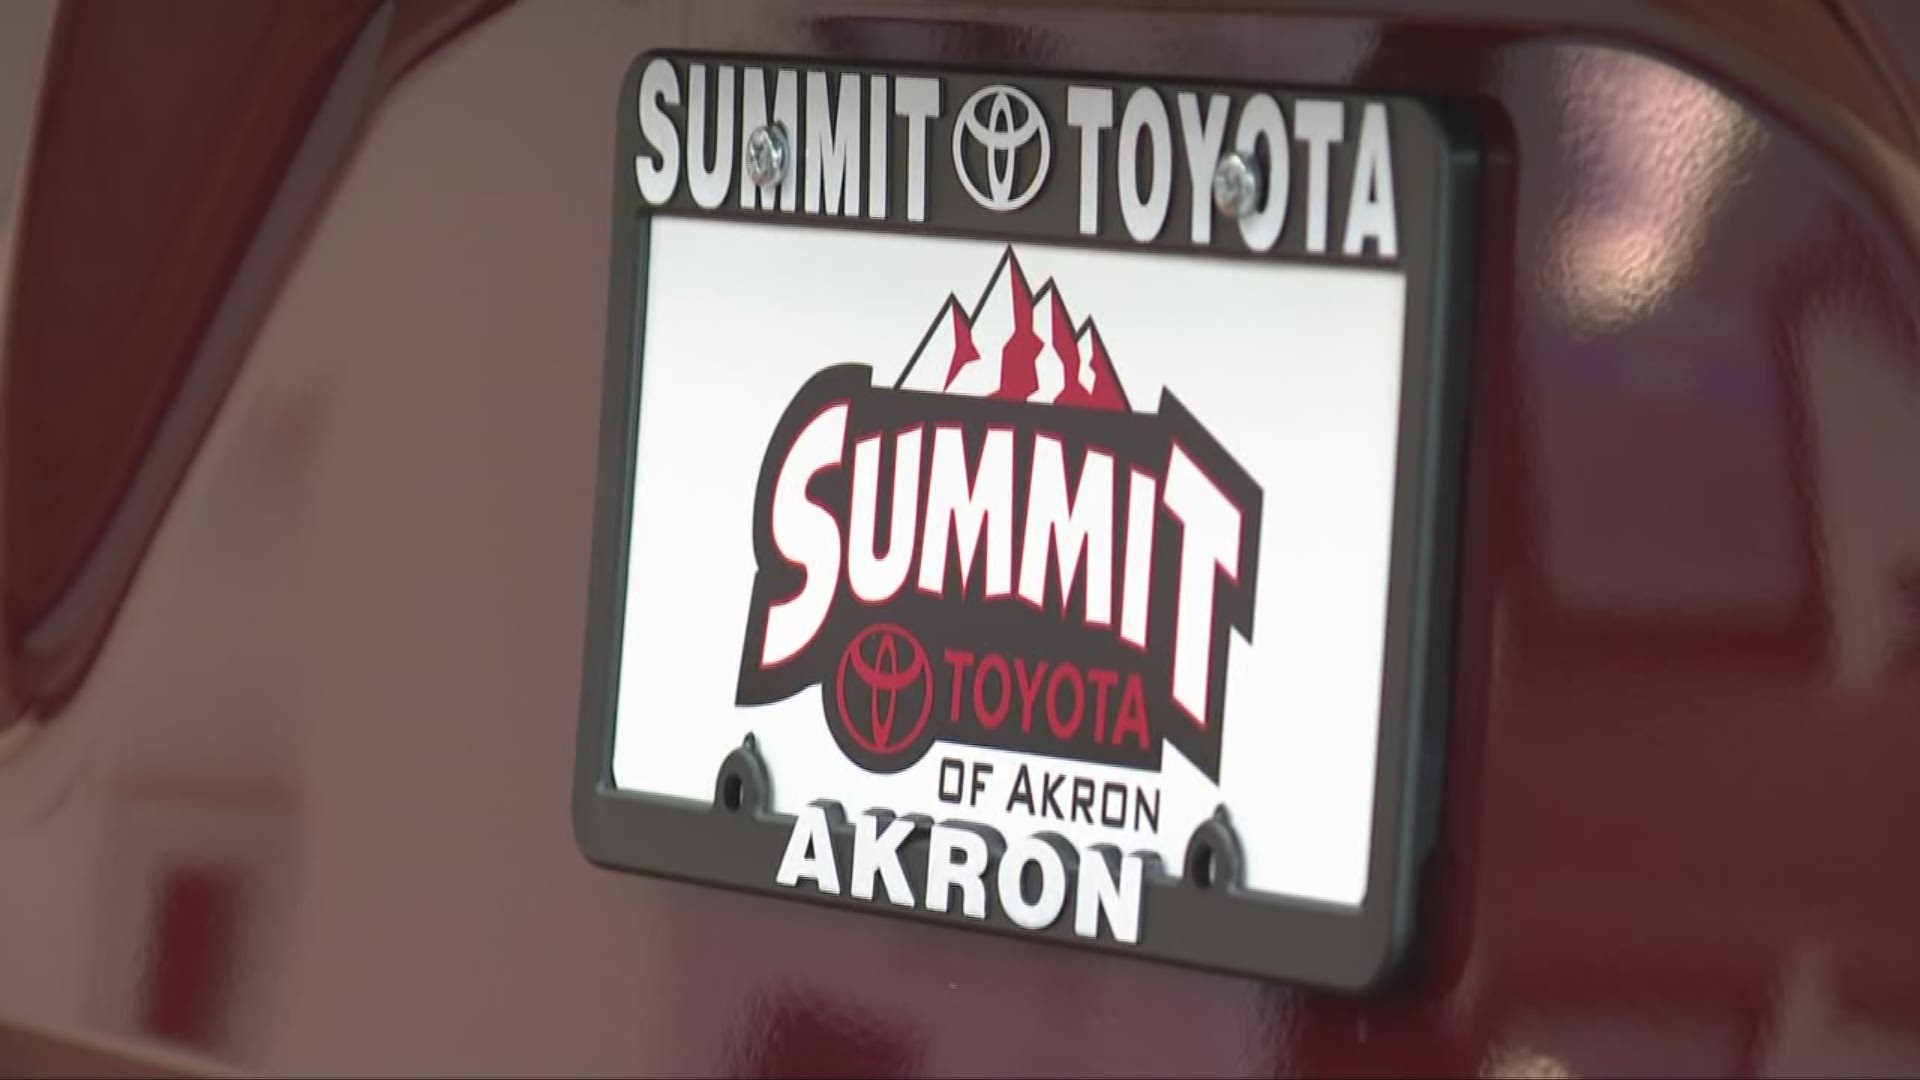 Phone lines at Summit Toyota being held hostage by hackers